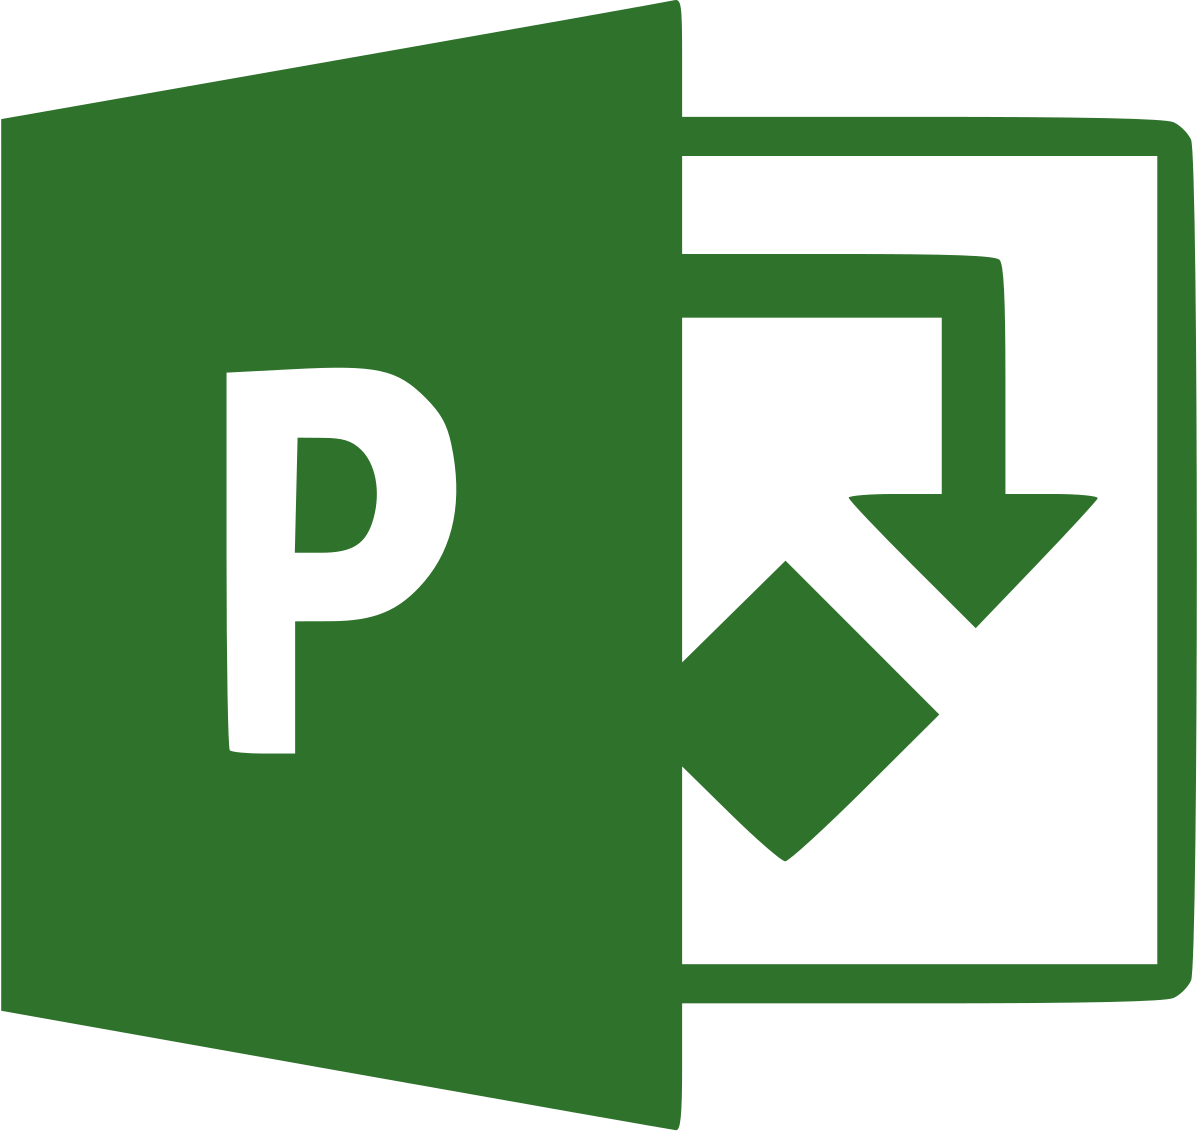 microsoft project 2019 free download full version with crack